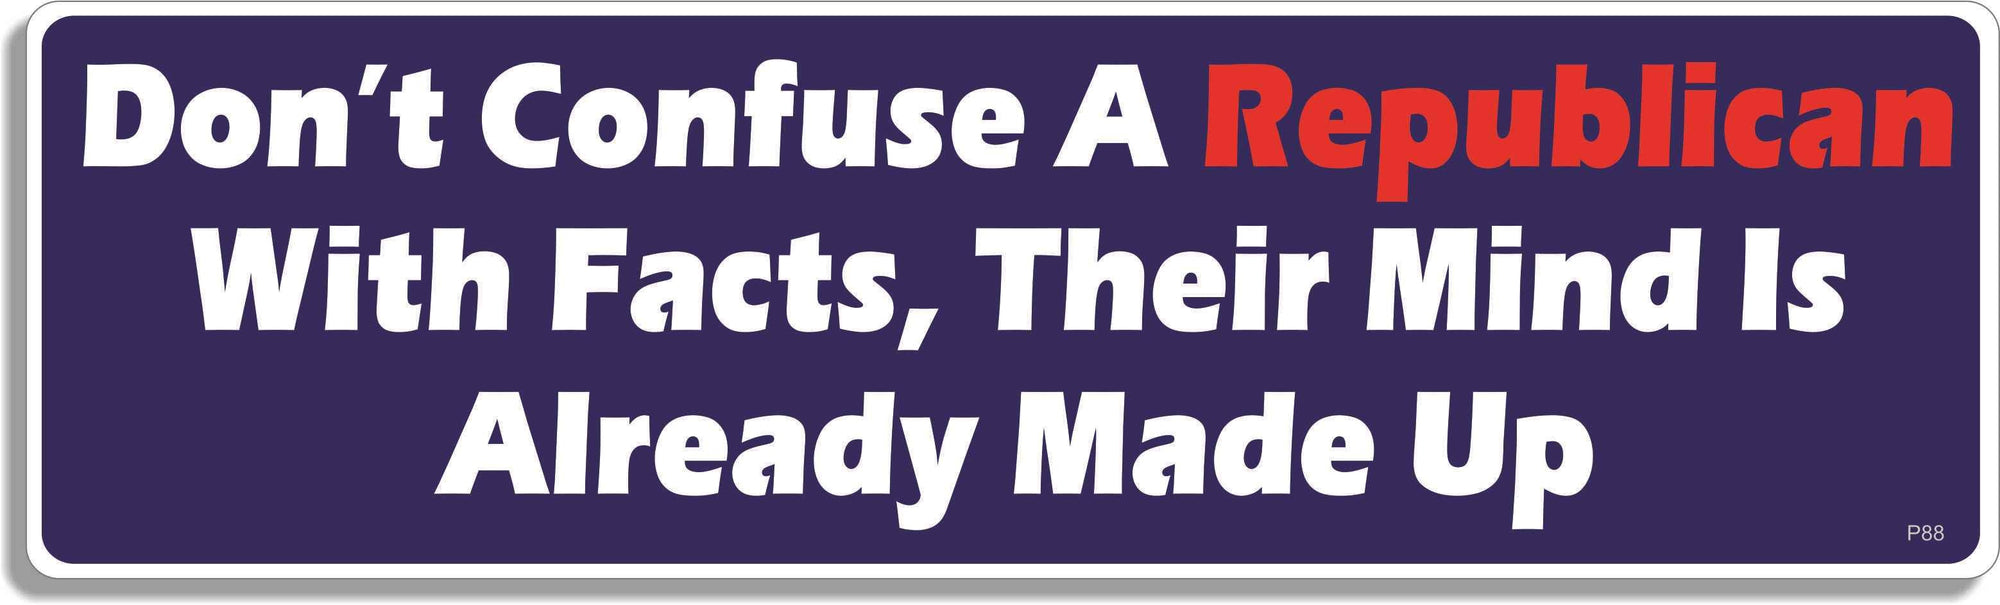 Don't confuse a Republican with facts. Their mind is already made up - 3" x 10" Bumper Sticker--Car Magnet- -  Decal Bumper Sticker-political Bumper Sticker Car Magnet Don't confuse a Republican with facts.-  Decal for carsanti gop, democrat, liberal, Politics